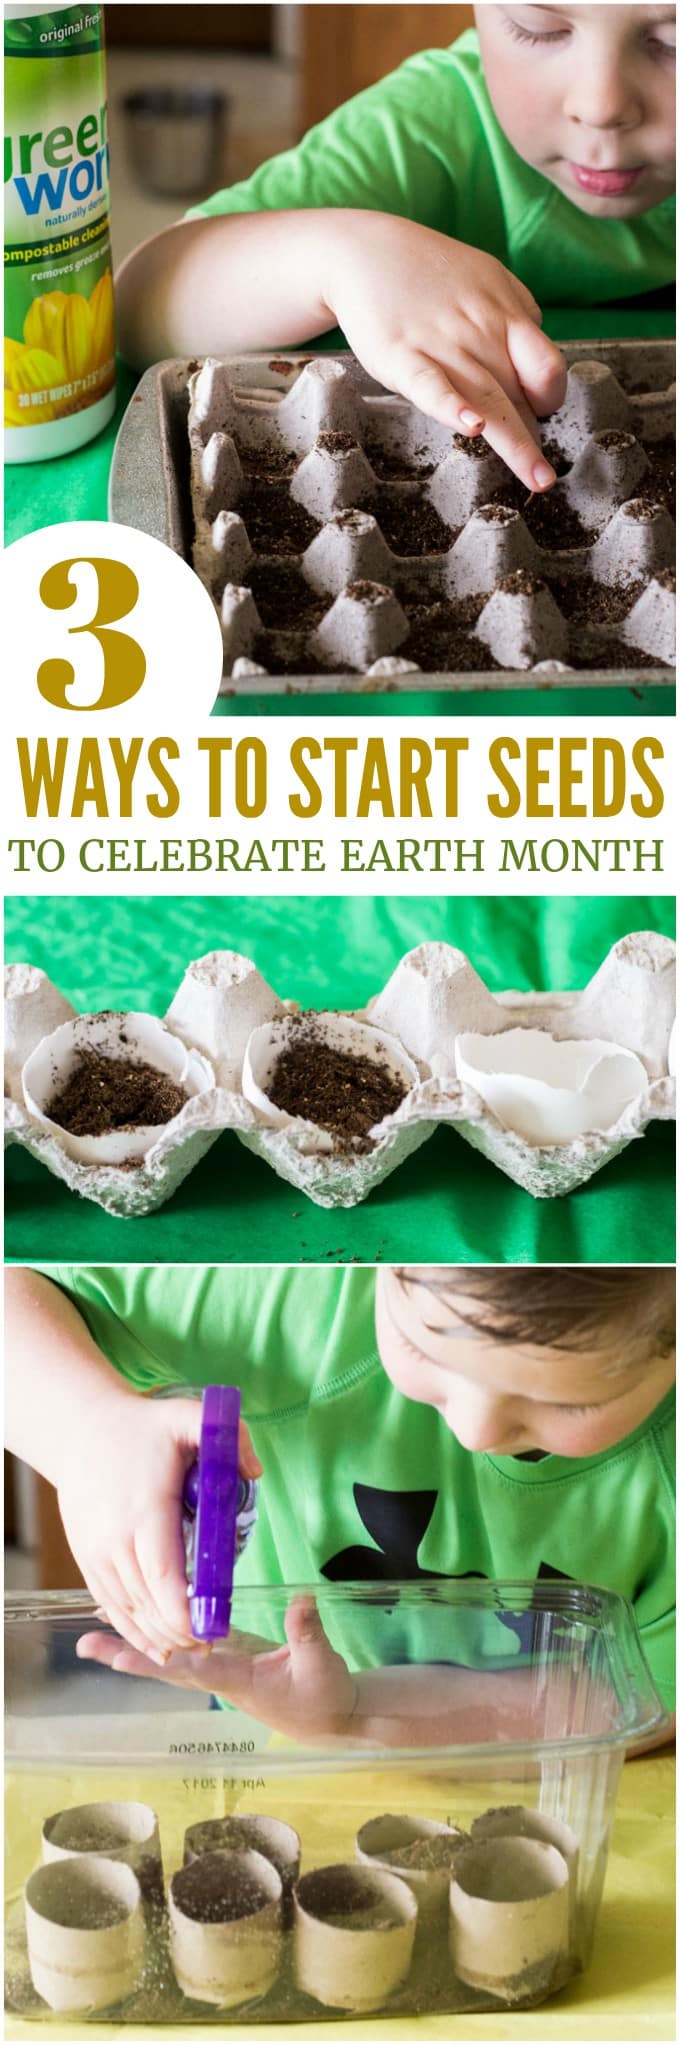 3 Earth-Friendly Ways to Start Seeds to Celebrate Earth Month